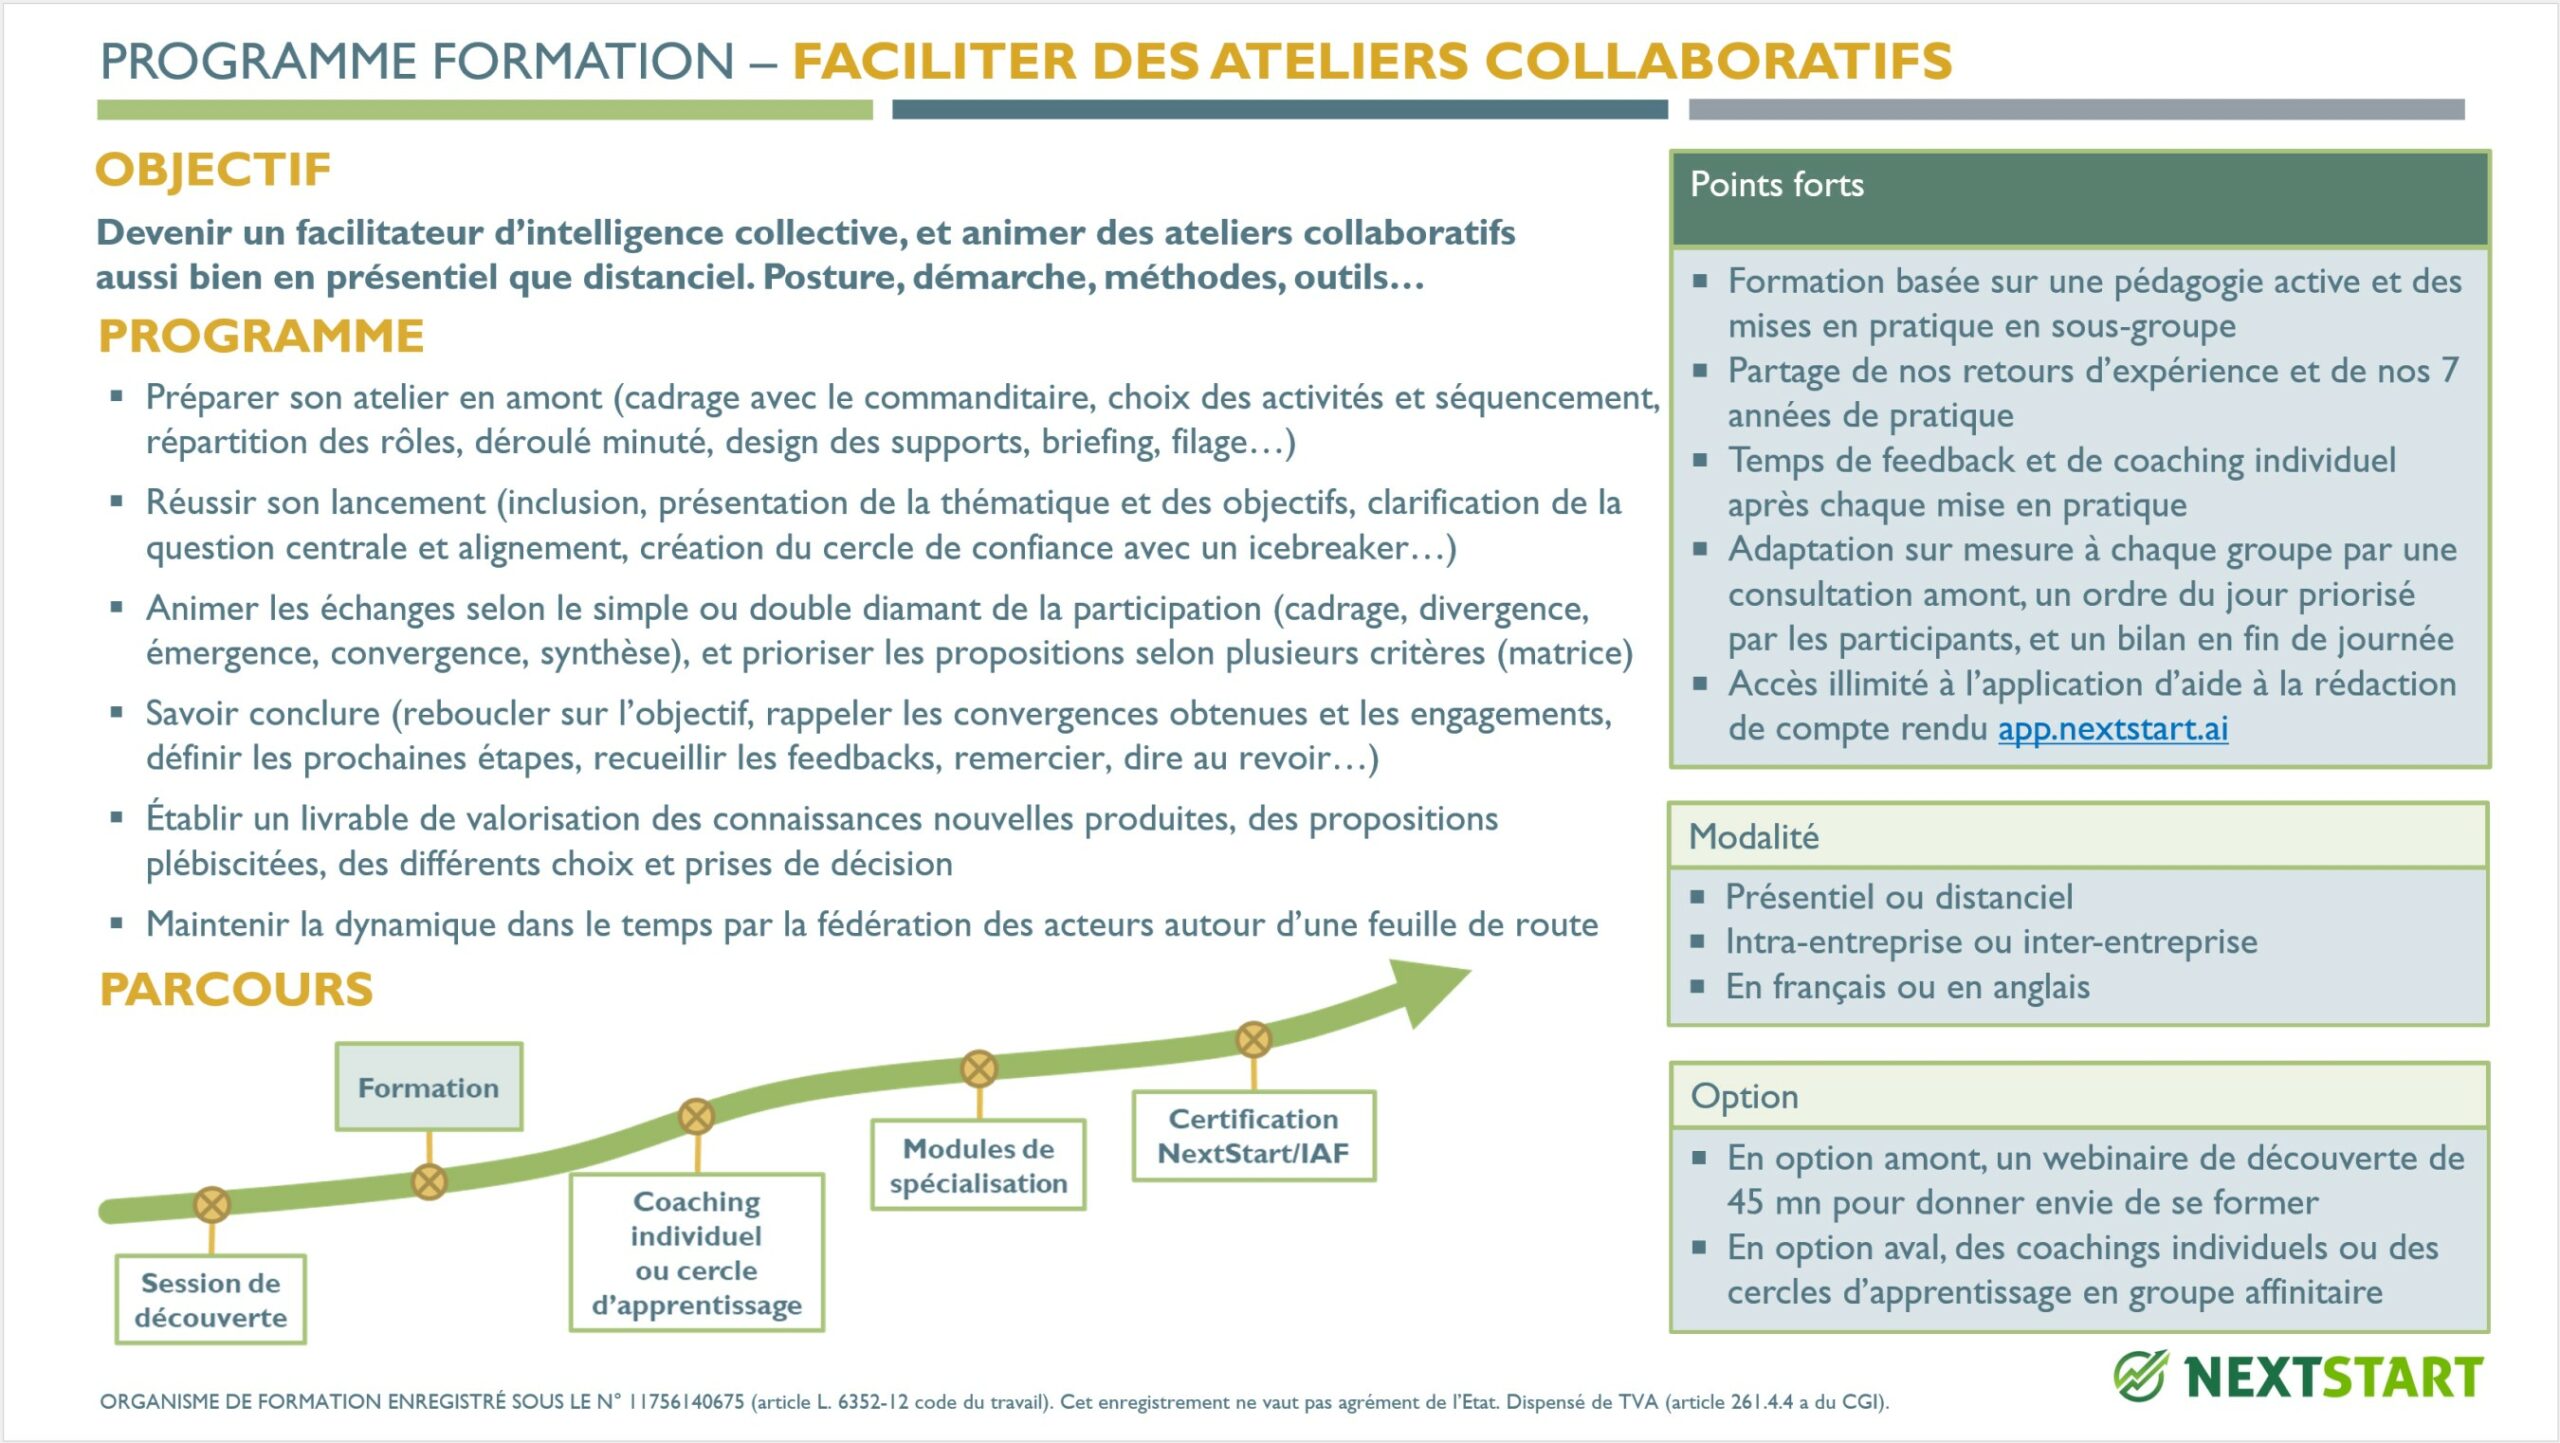 Training - Facilitate collaborative / collective intelligence workshops